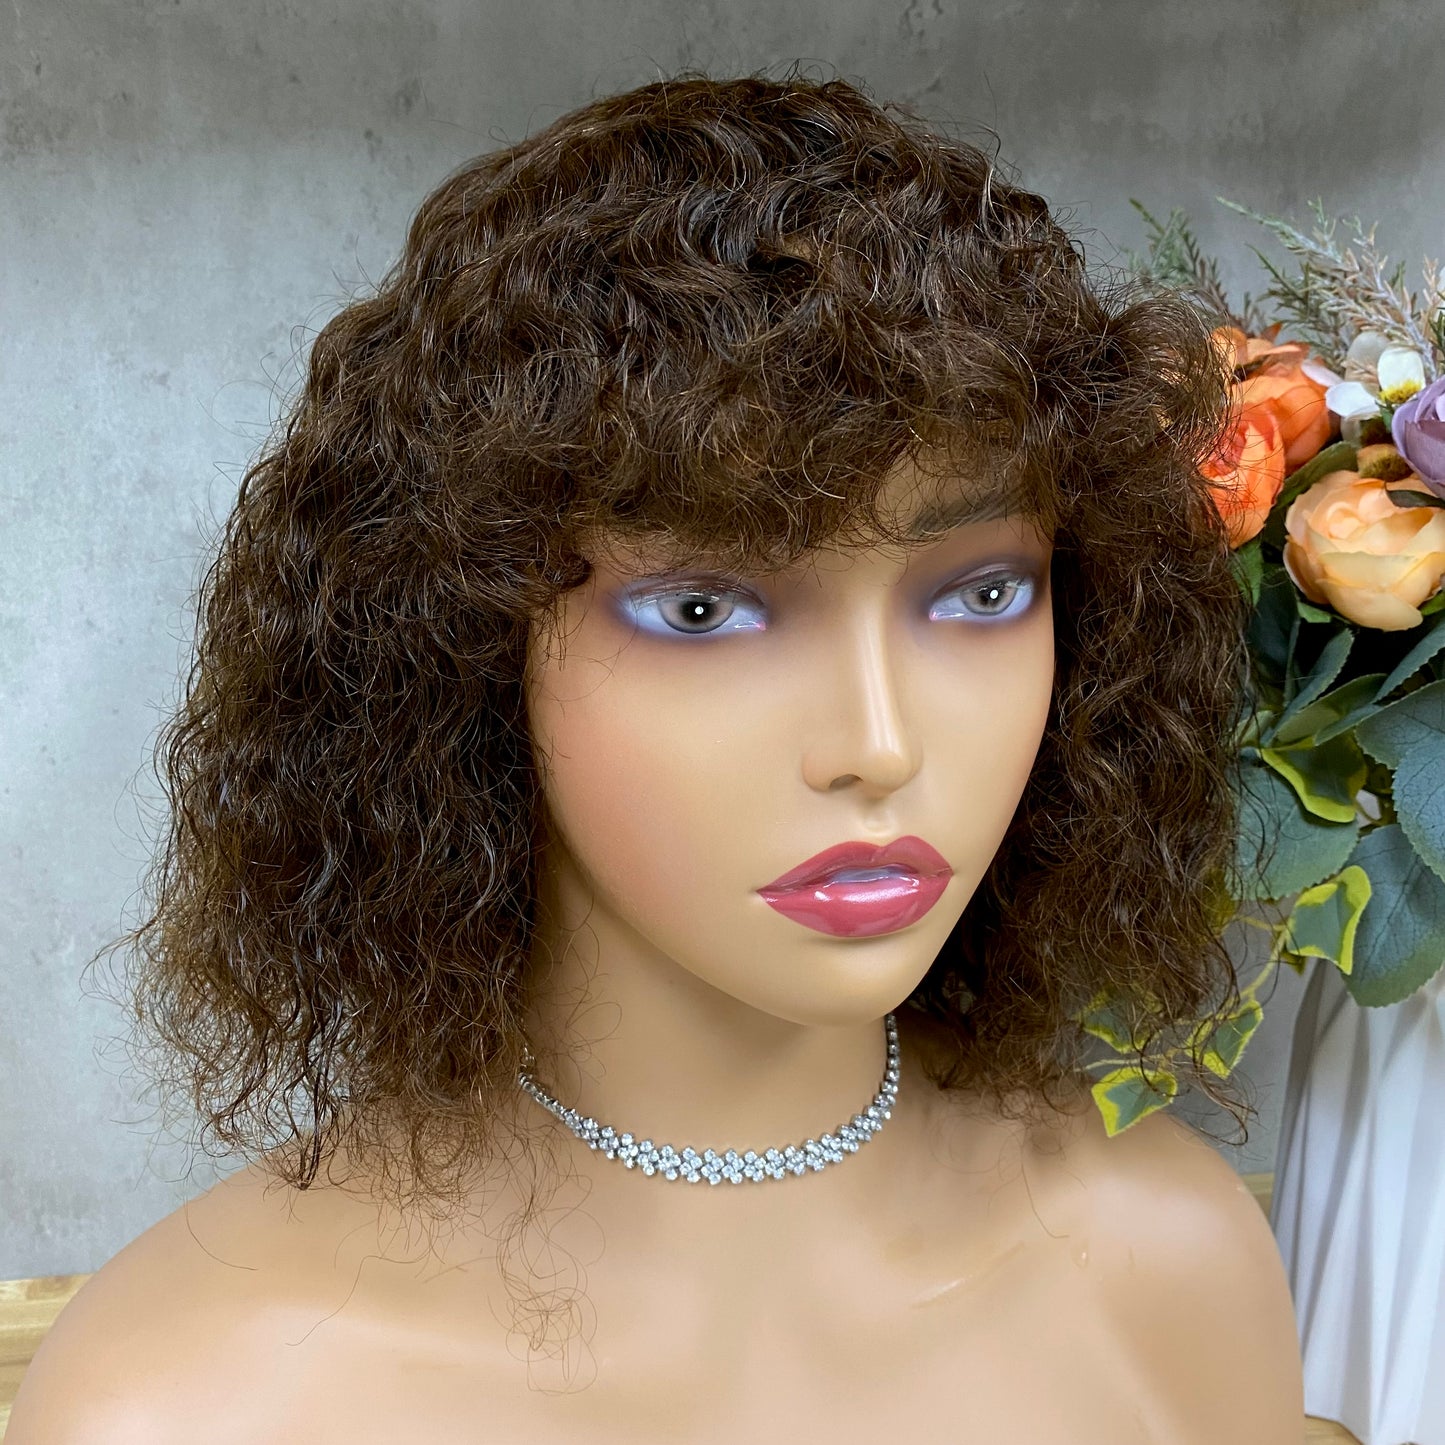 Special Texture Remy Human Hair Water Curl Wig